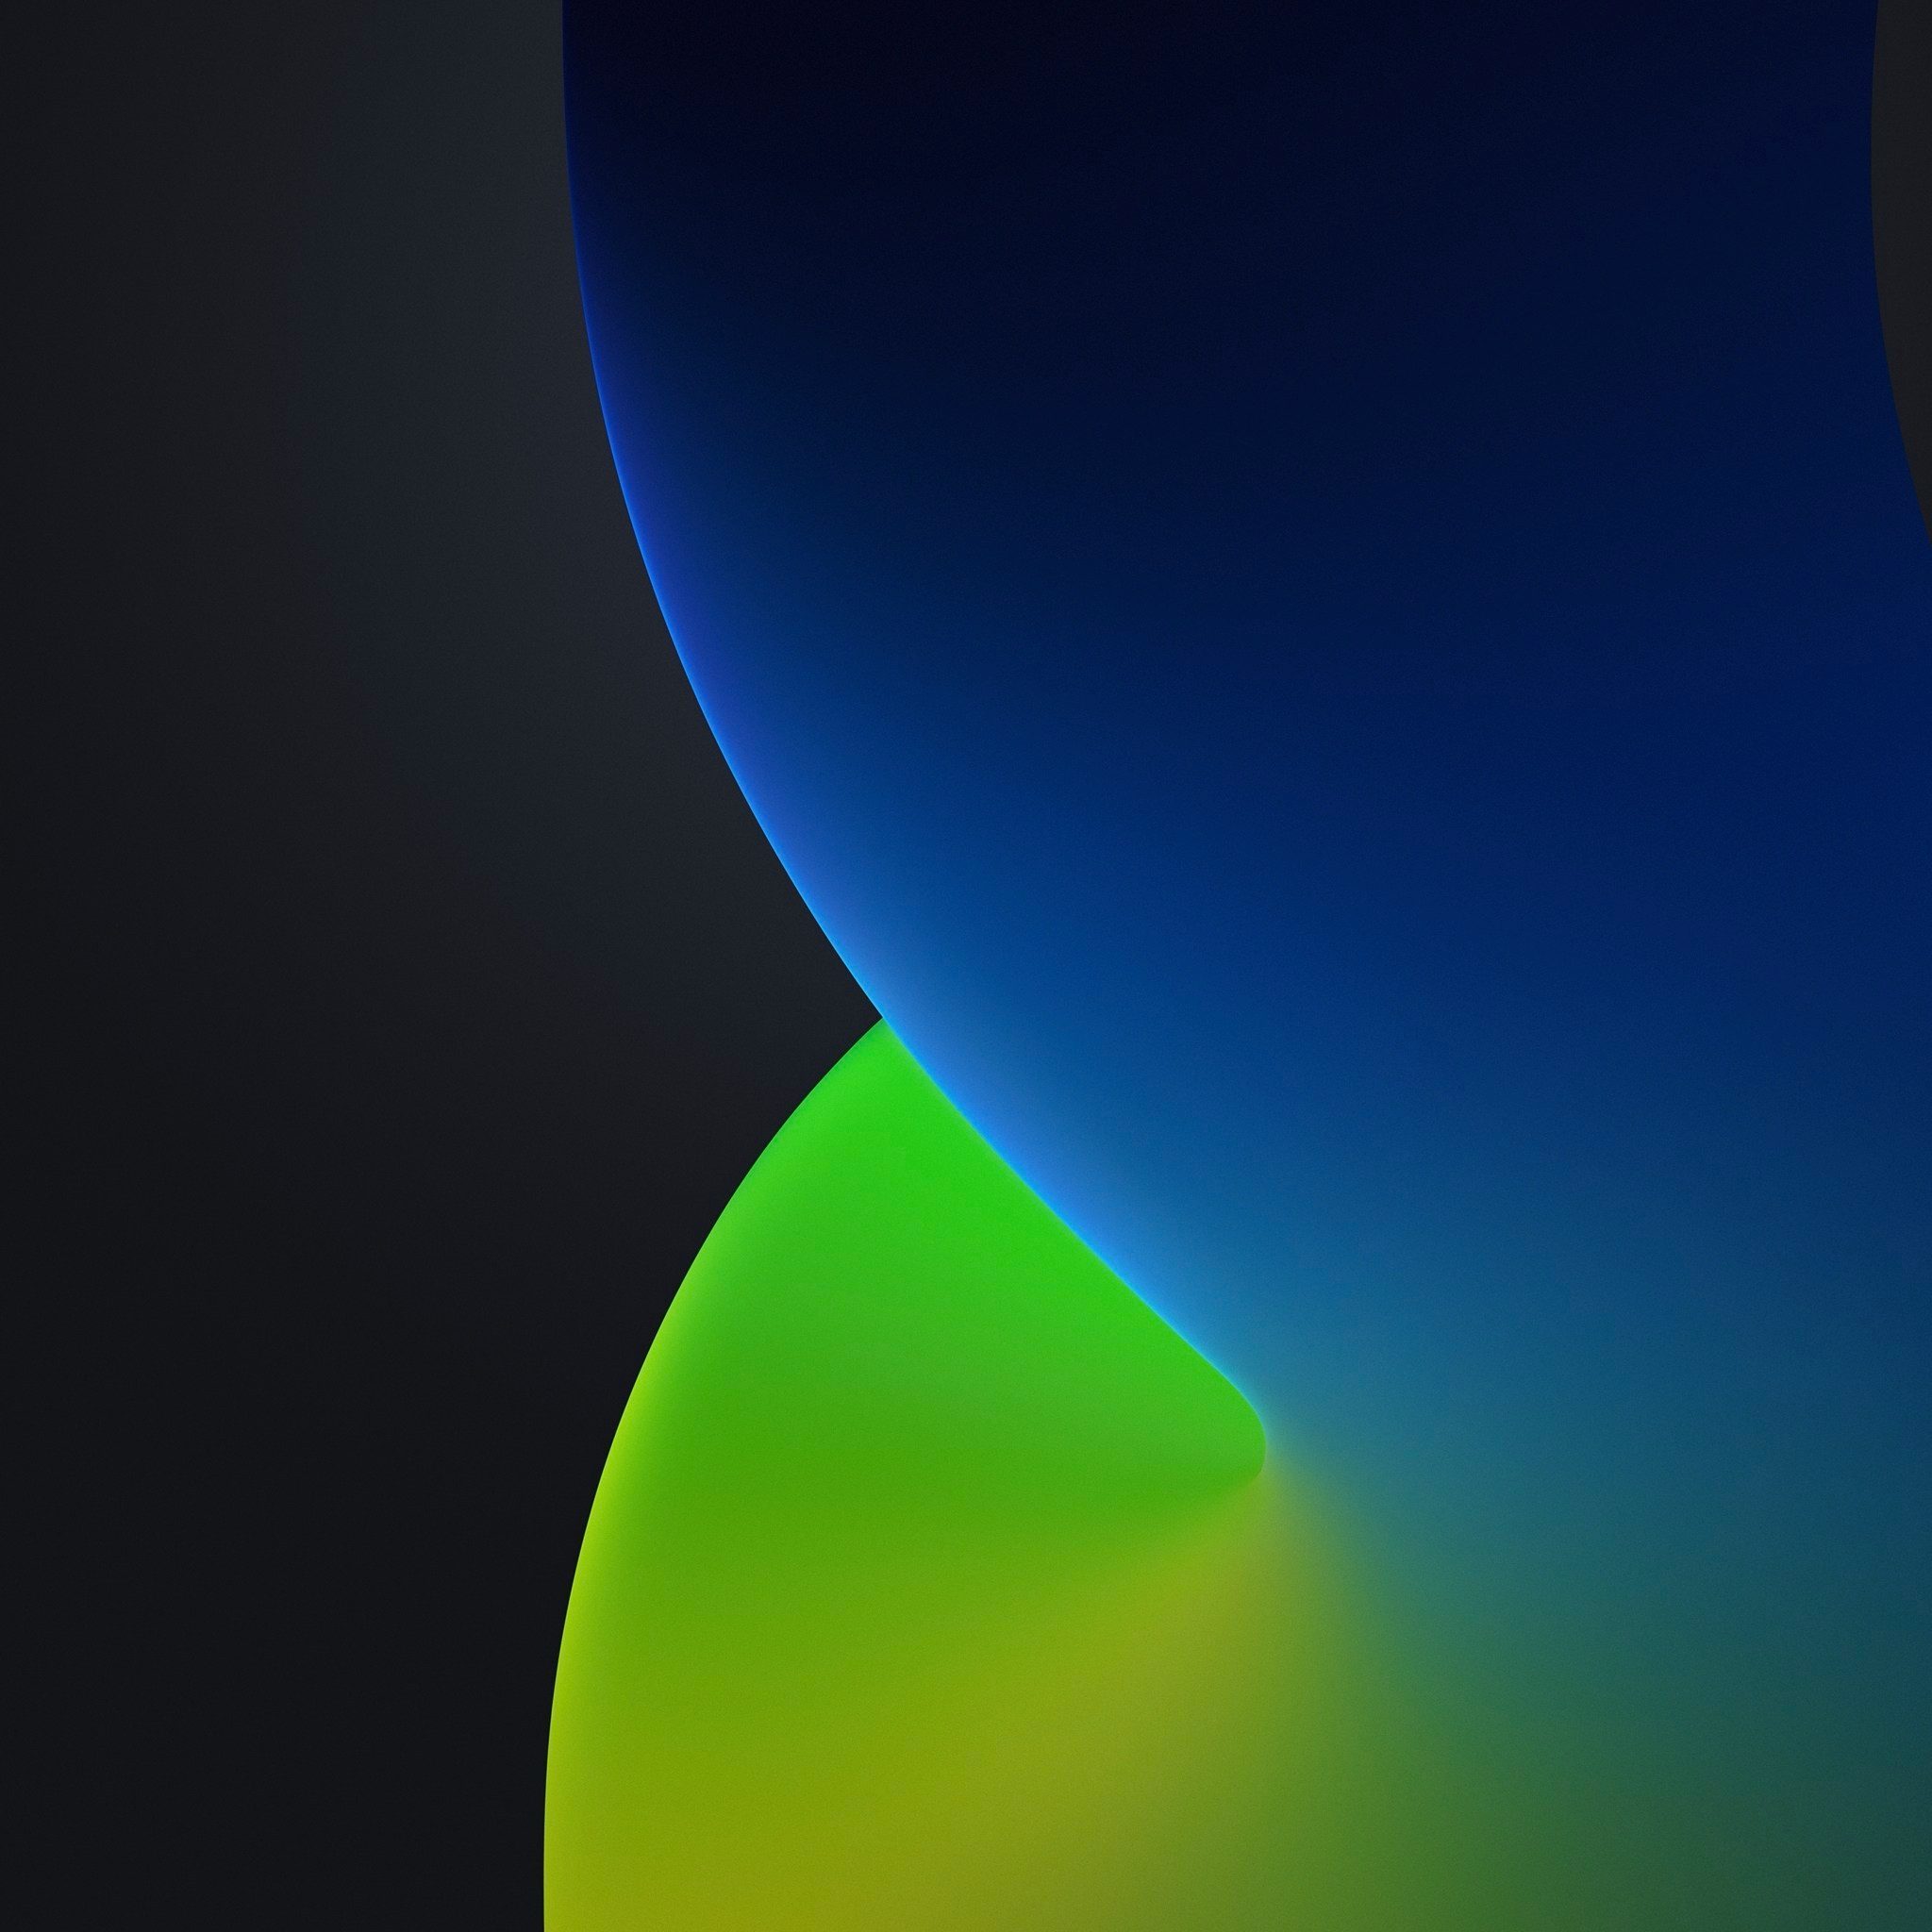 iOS14 Special Edition 4 FLUO Light  Iphone homescreen wallpaper Iphone  wallpaper Apple wallpaper